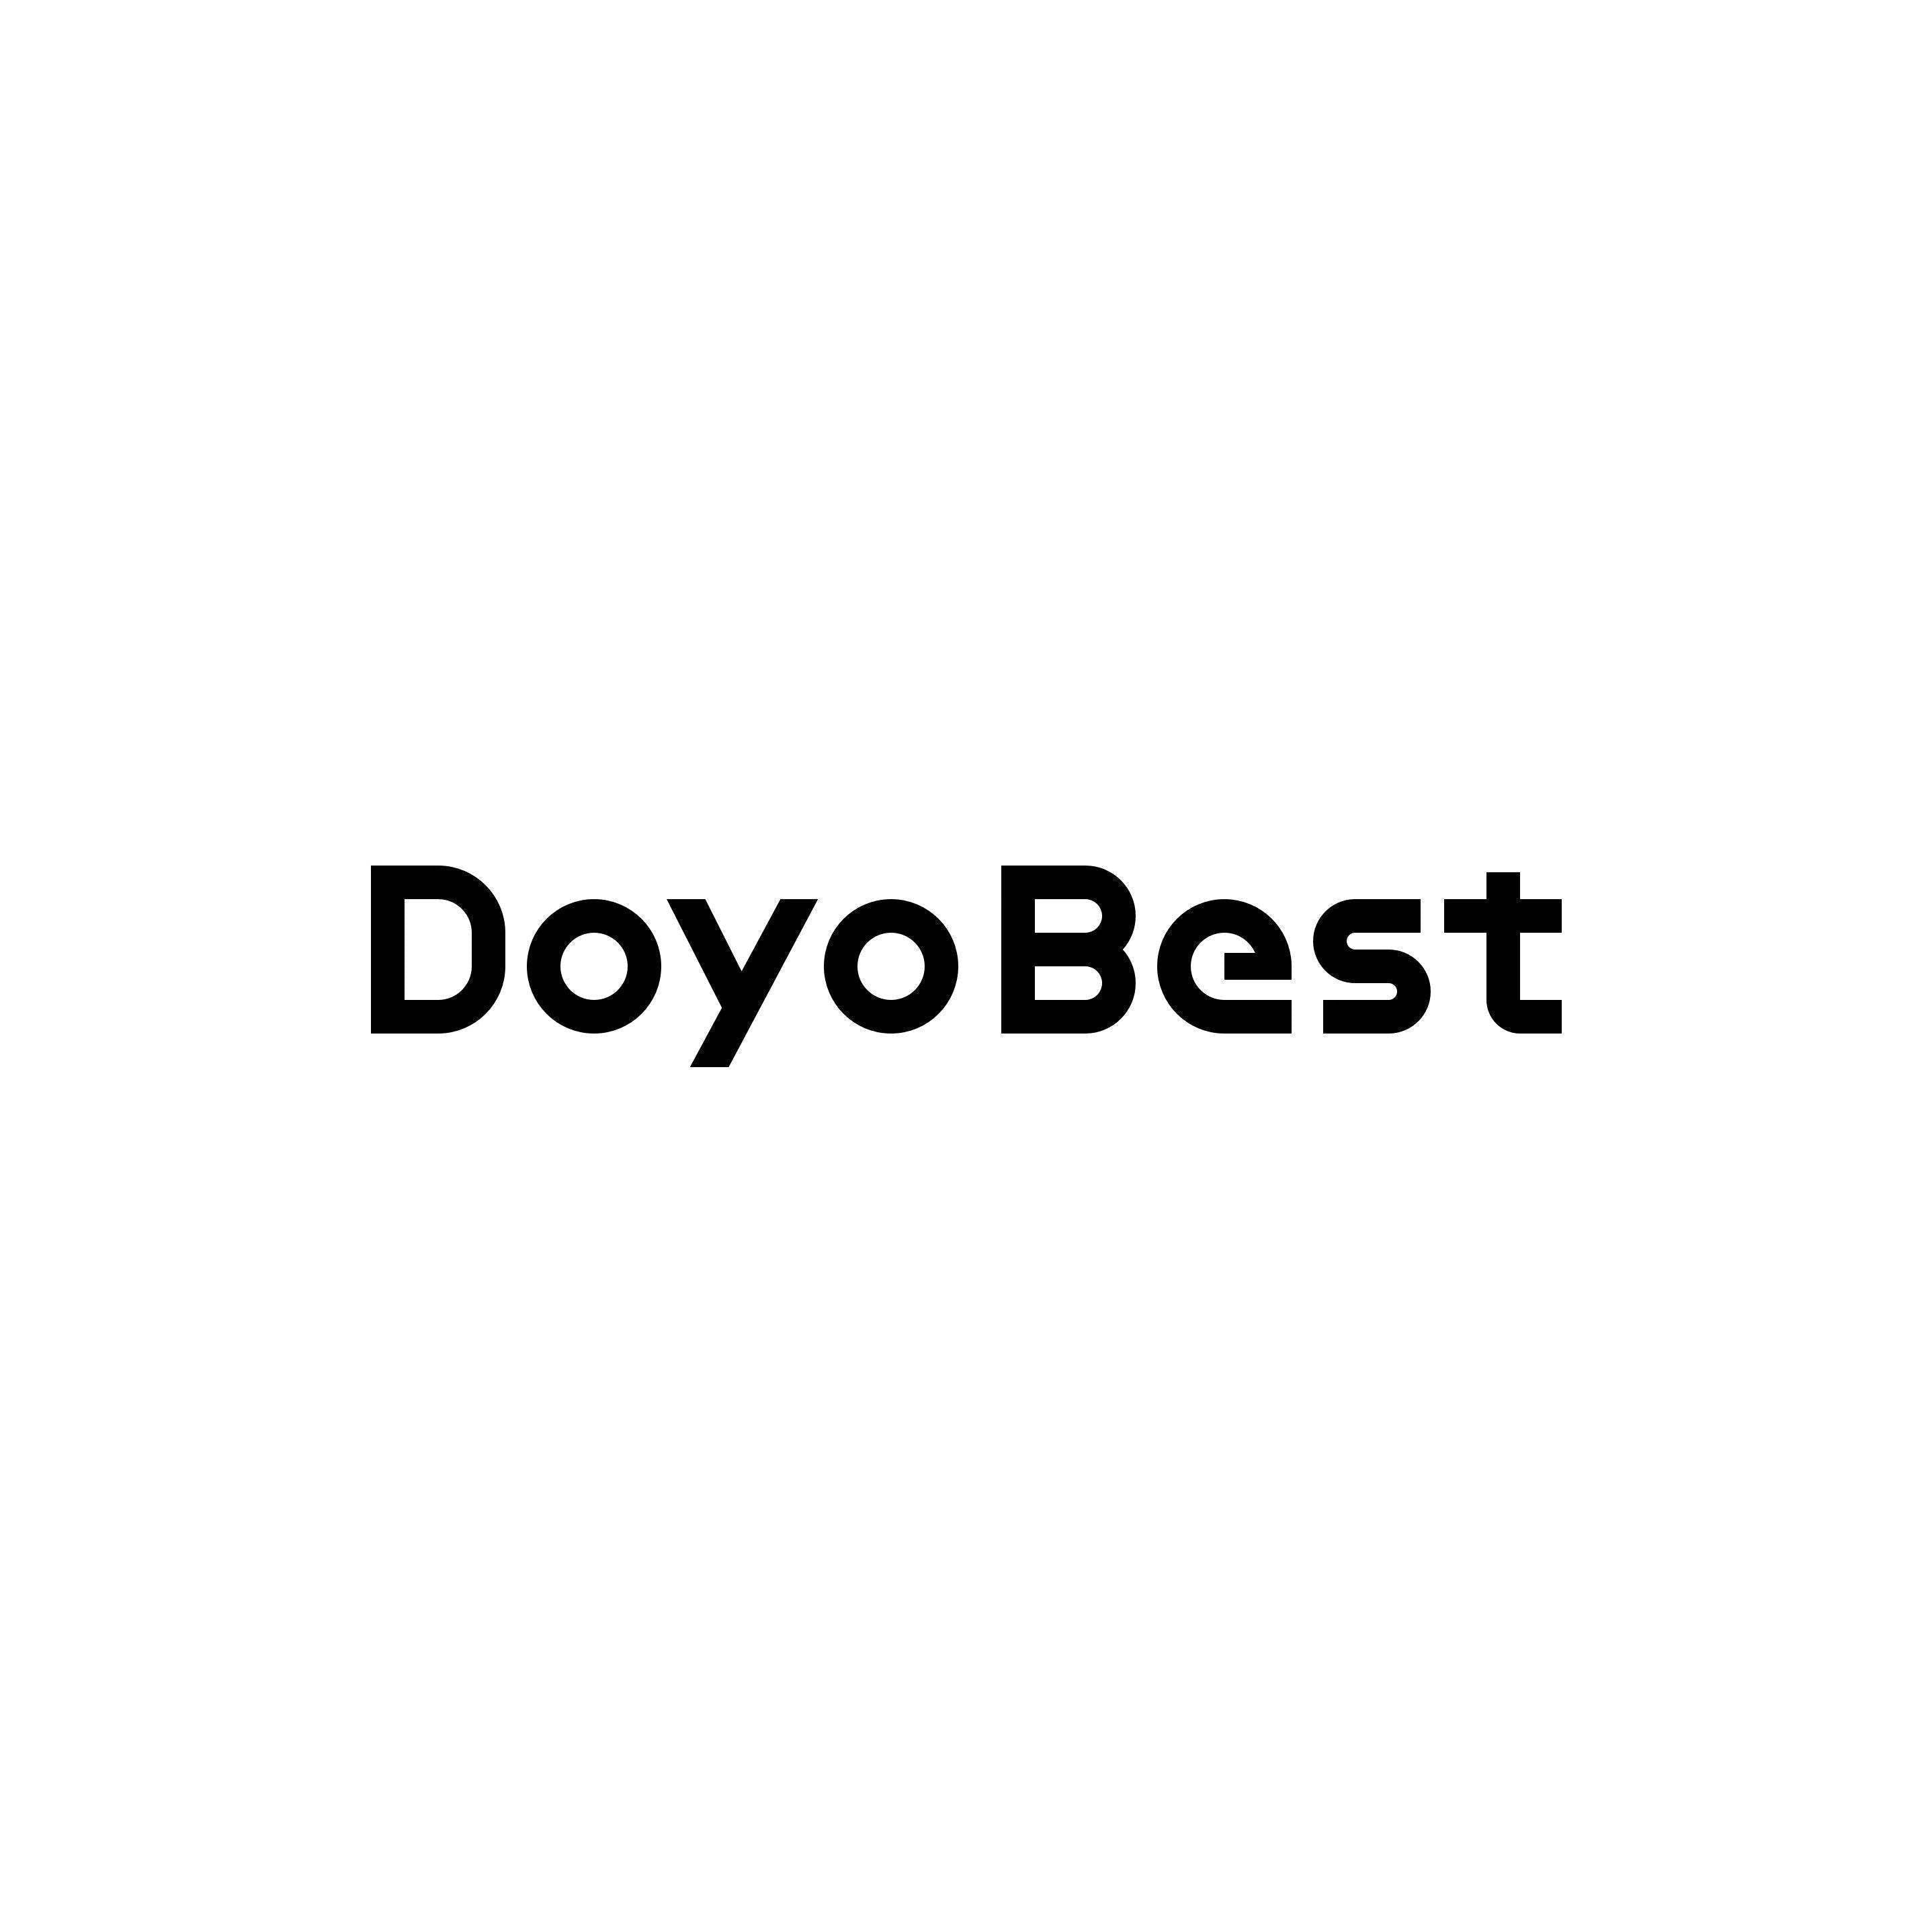 Personalized Gifts in Canada: Make Every Occasion Special – DoyoBest